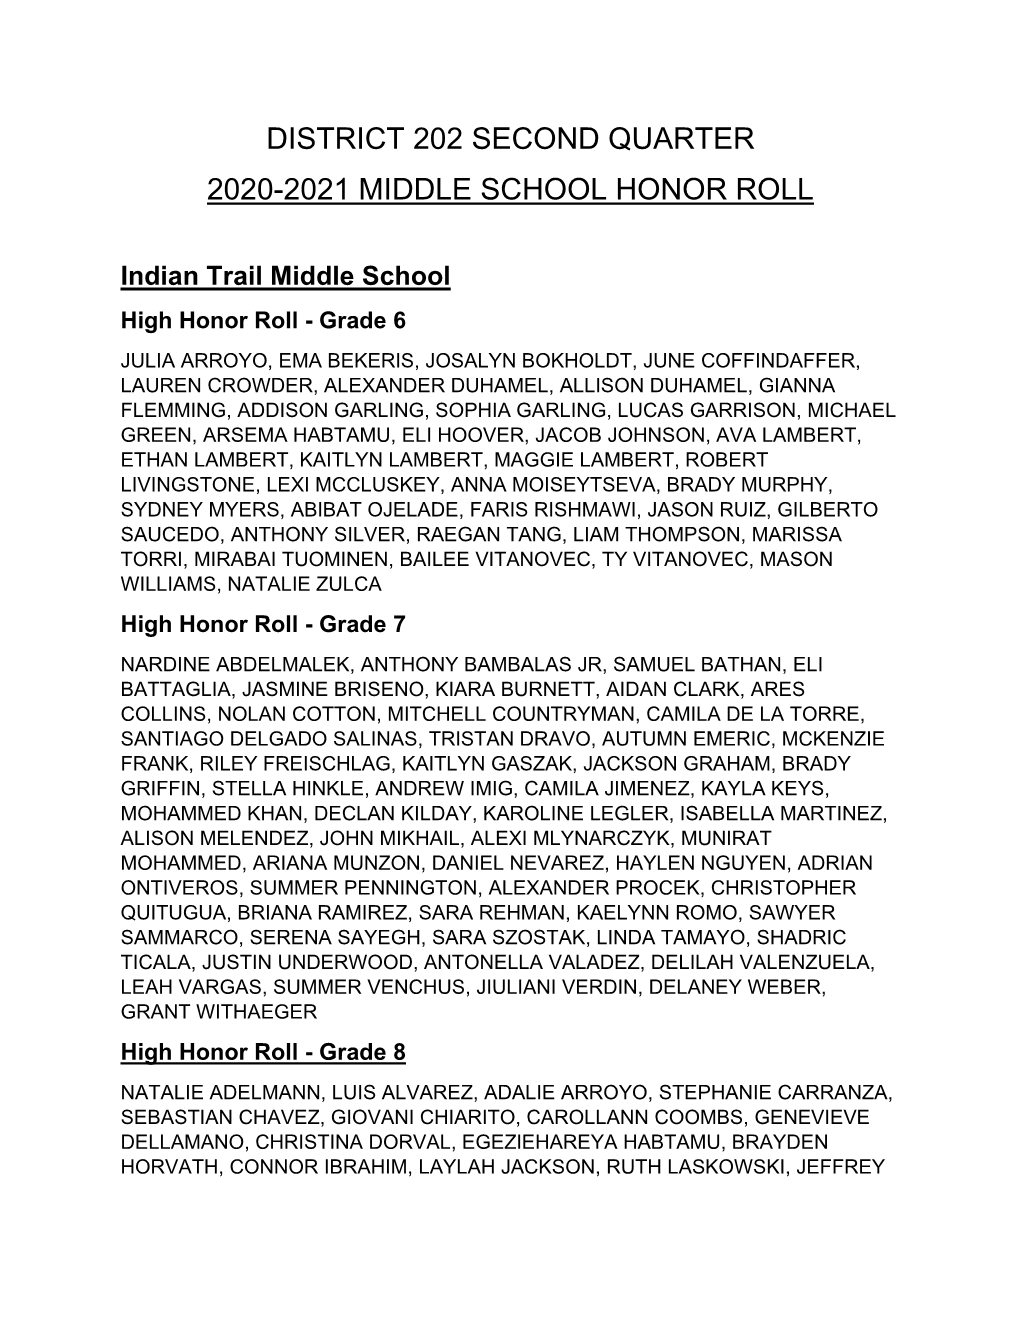 District 202 Second Quarter 2020-2021 Middle School Honor Roll